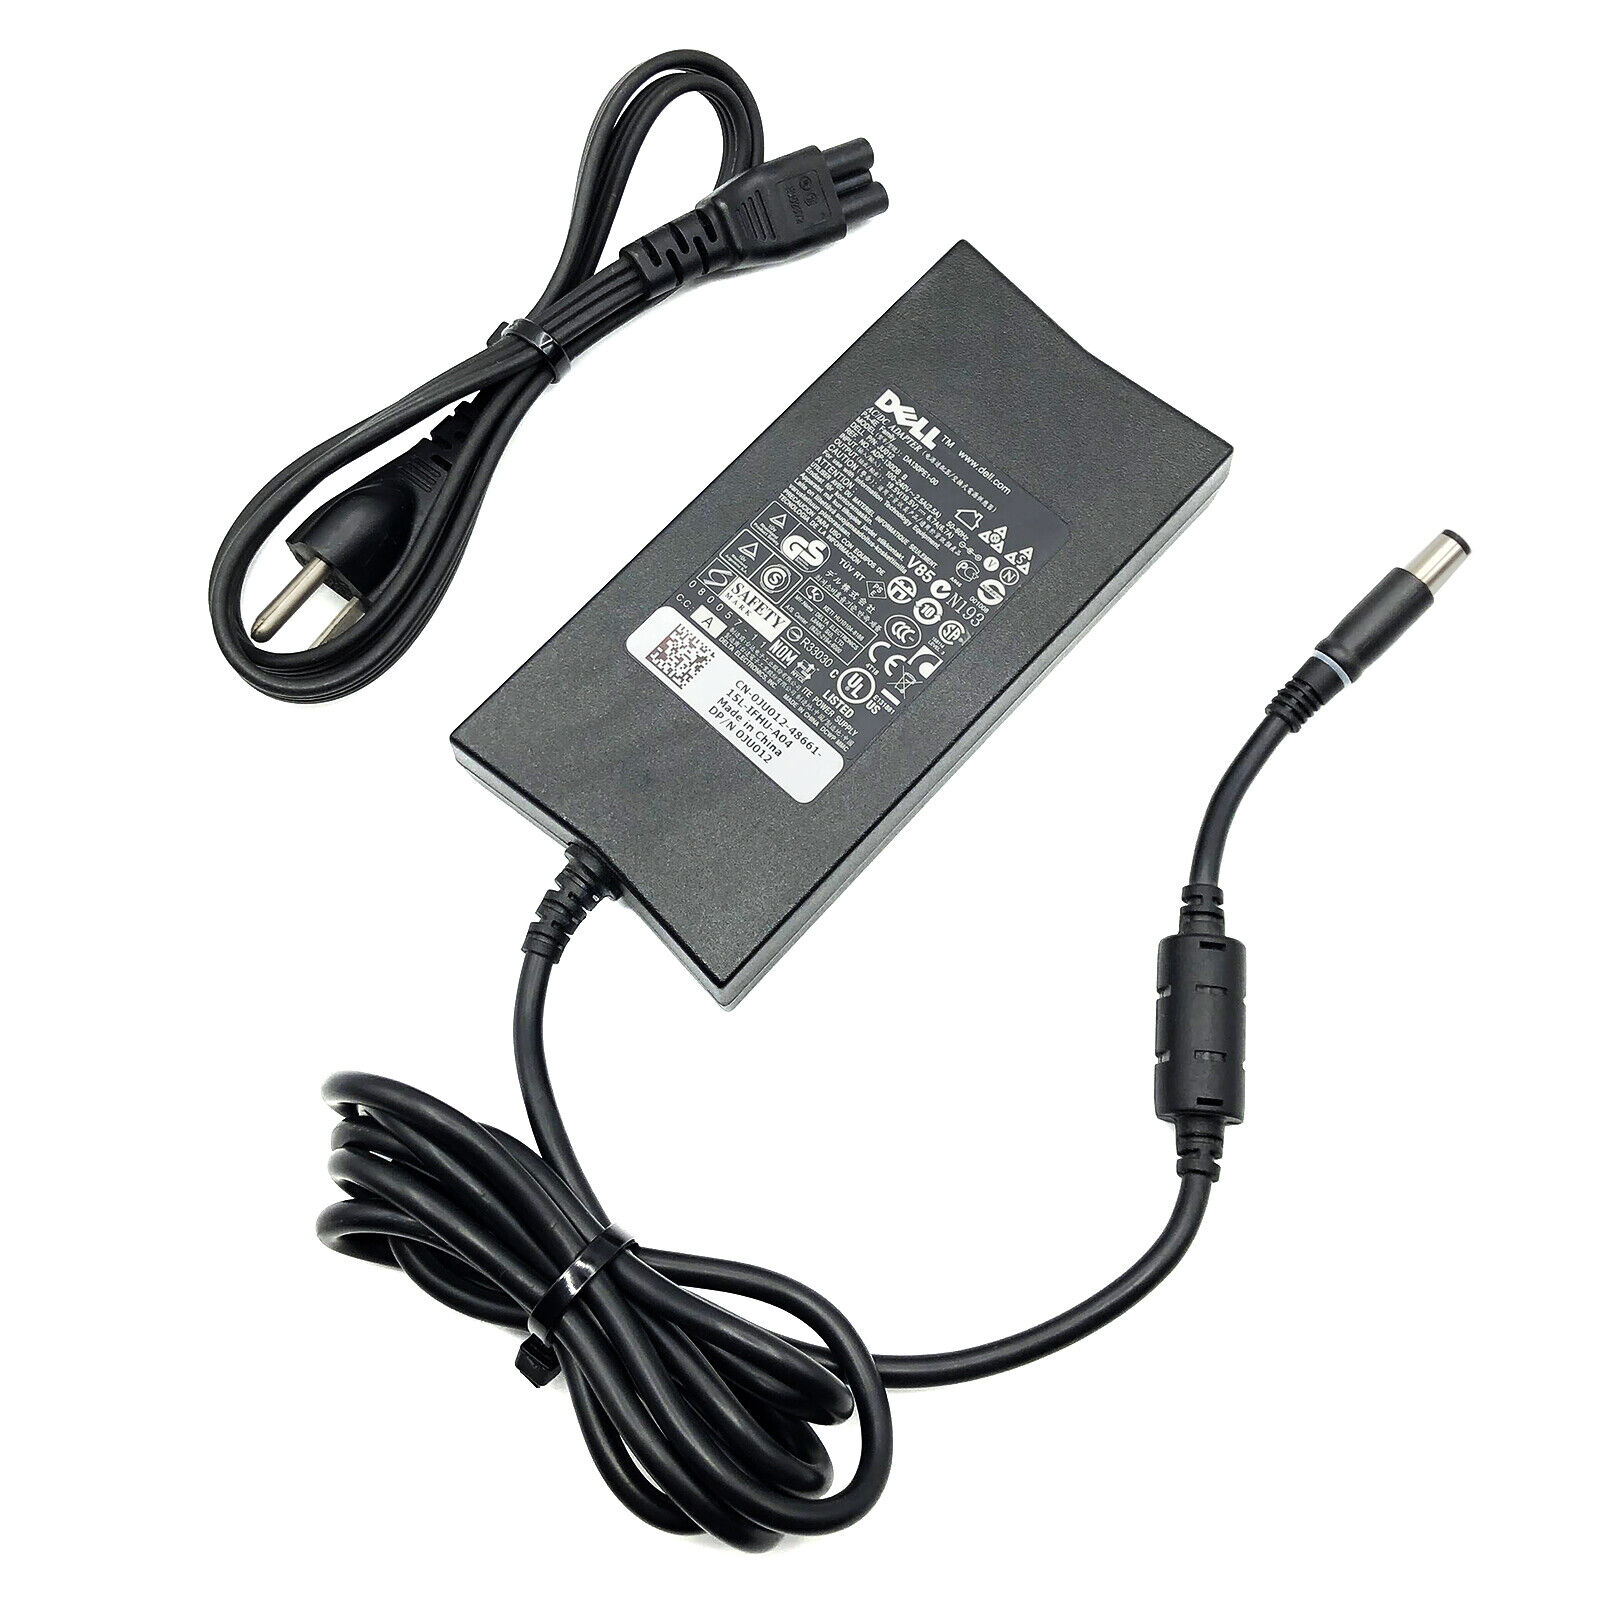 Genuine Dell LA130PM190 AC Adapter Power Supply Chargers 130W 19.5V 6.7A W/Cord